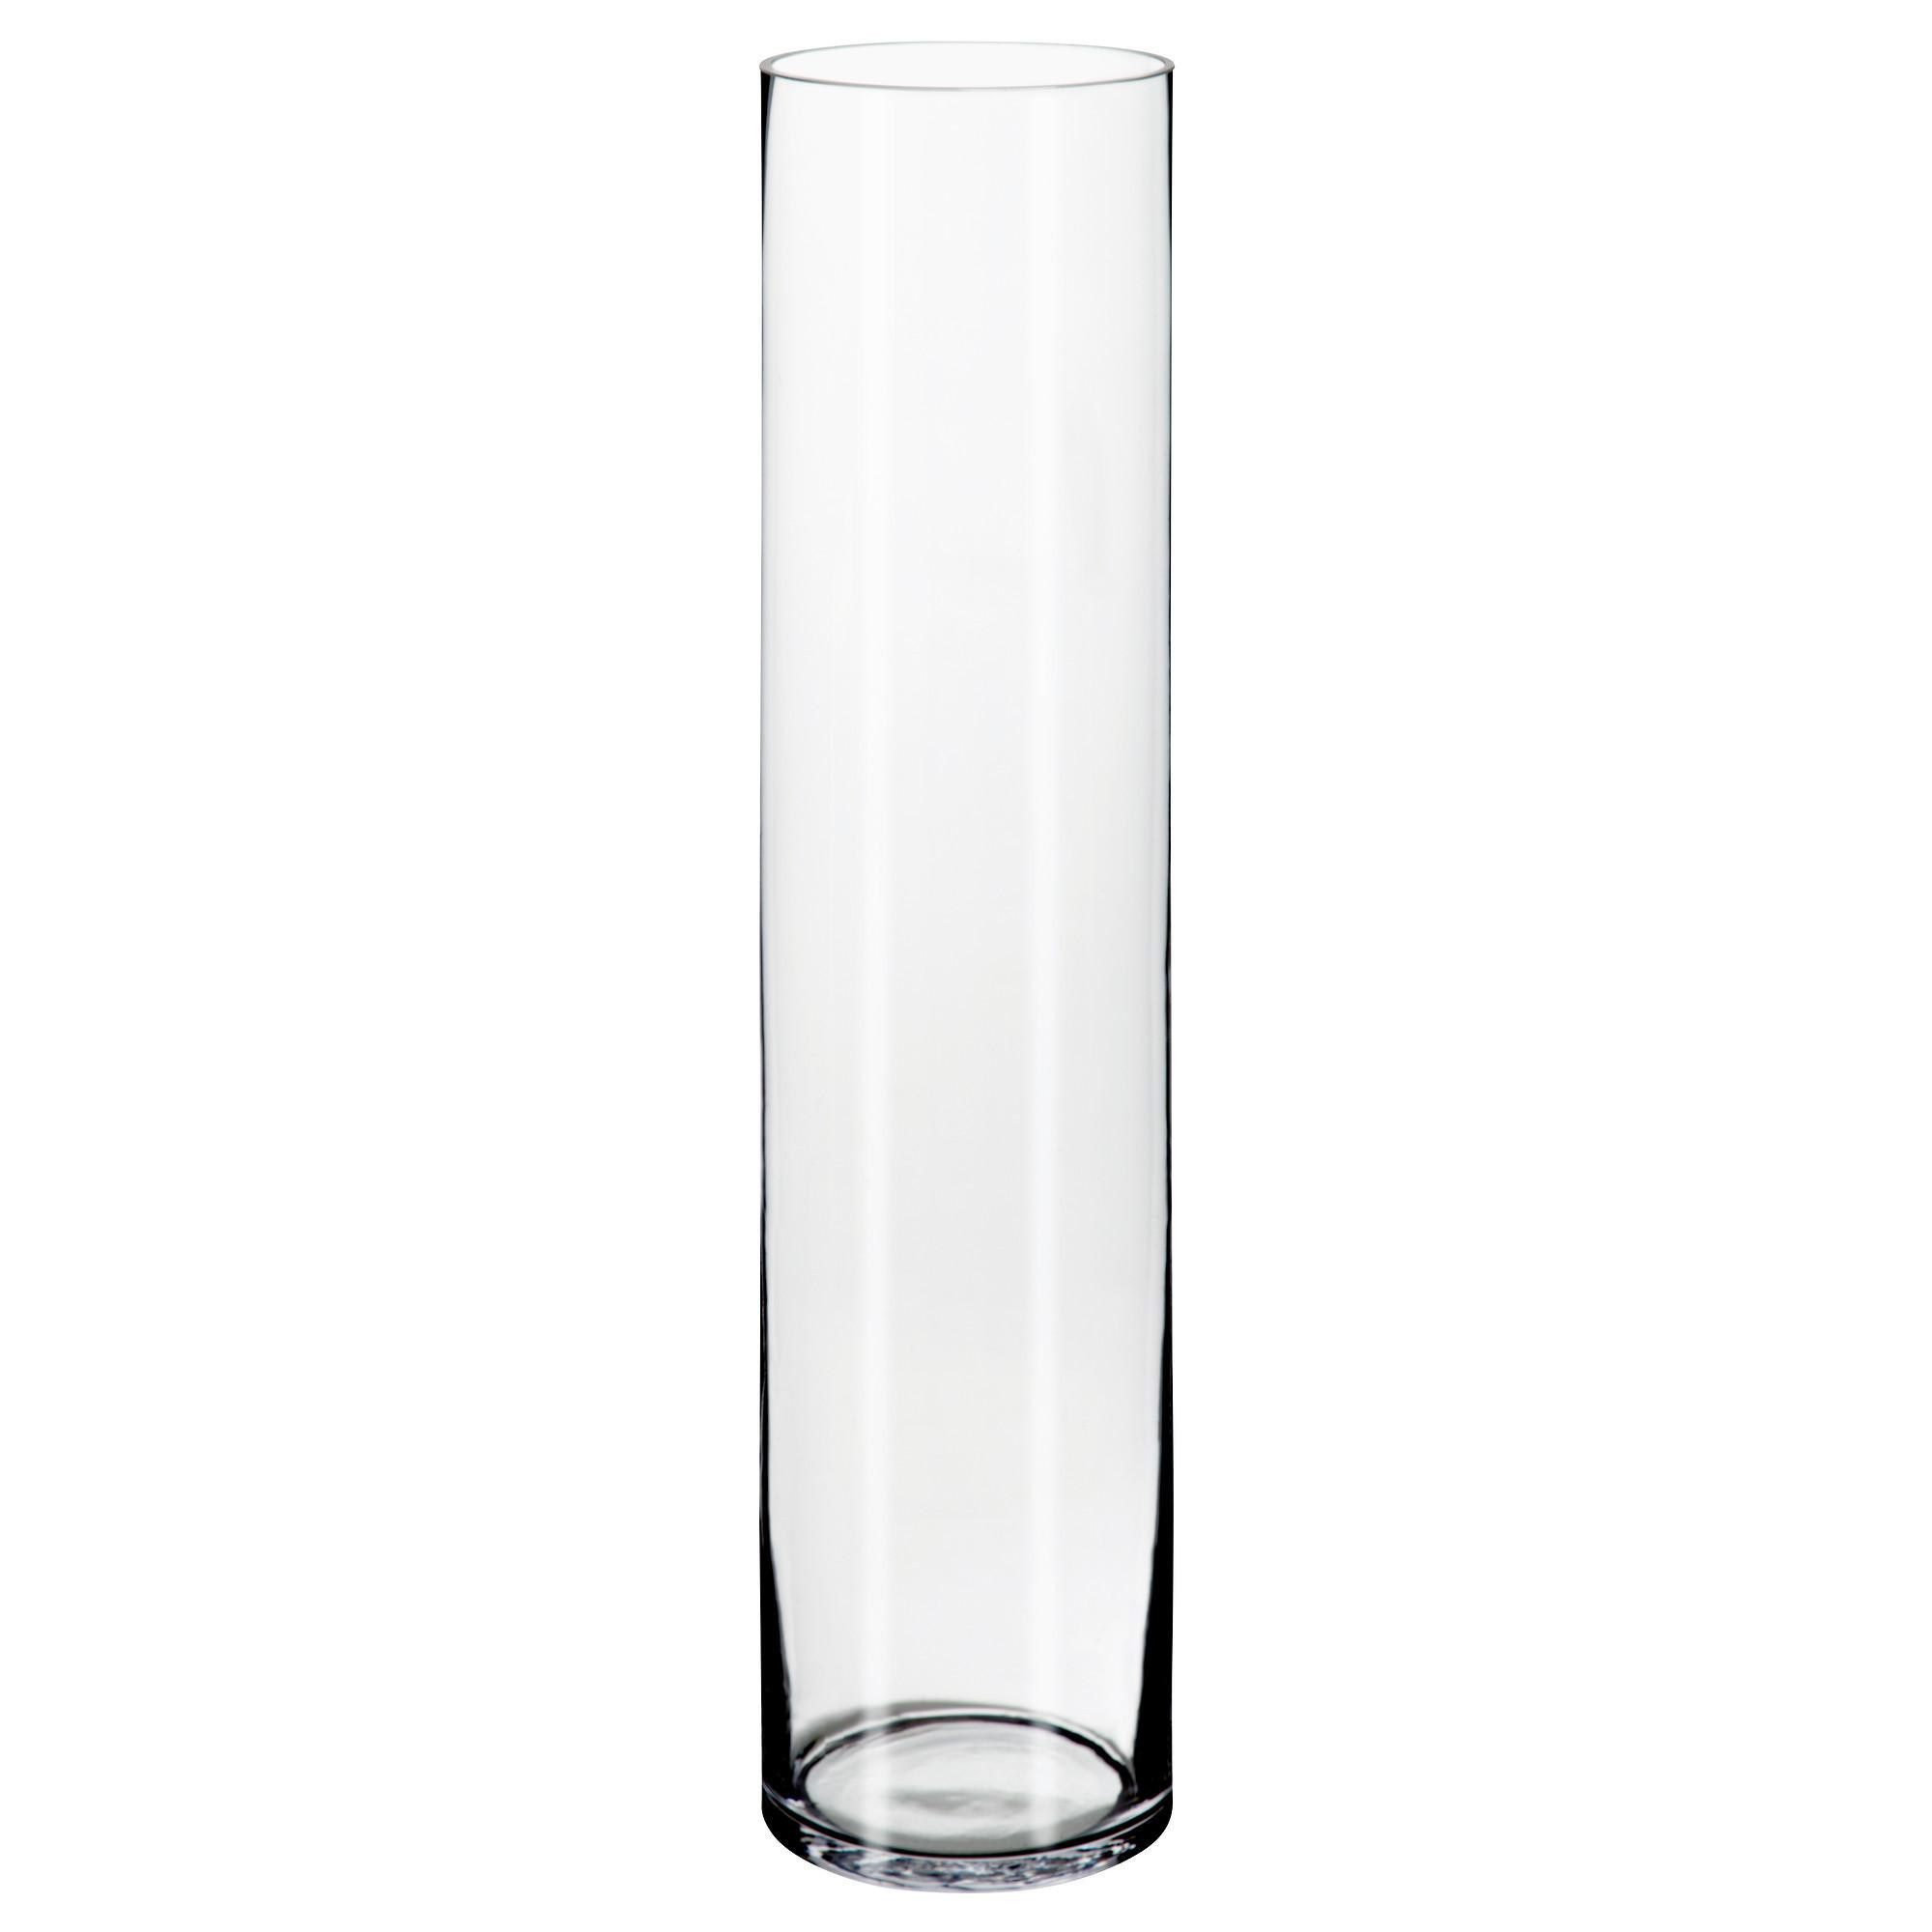 17 Unique 18 Inch Cylinder Vases wholesale 2024 free download 18 inch cylinder vases wholesale of black glass vase stock coloring colored glass vases elegant living within black glass vase stock coloring colored glass vases elegant living room vase gla